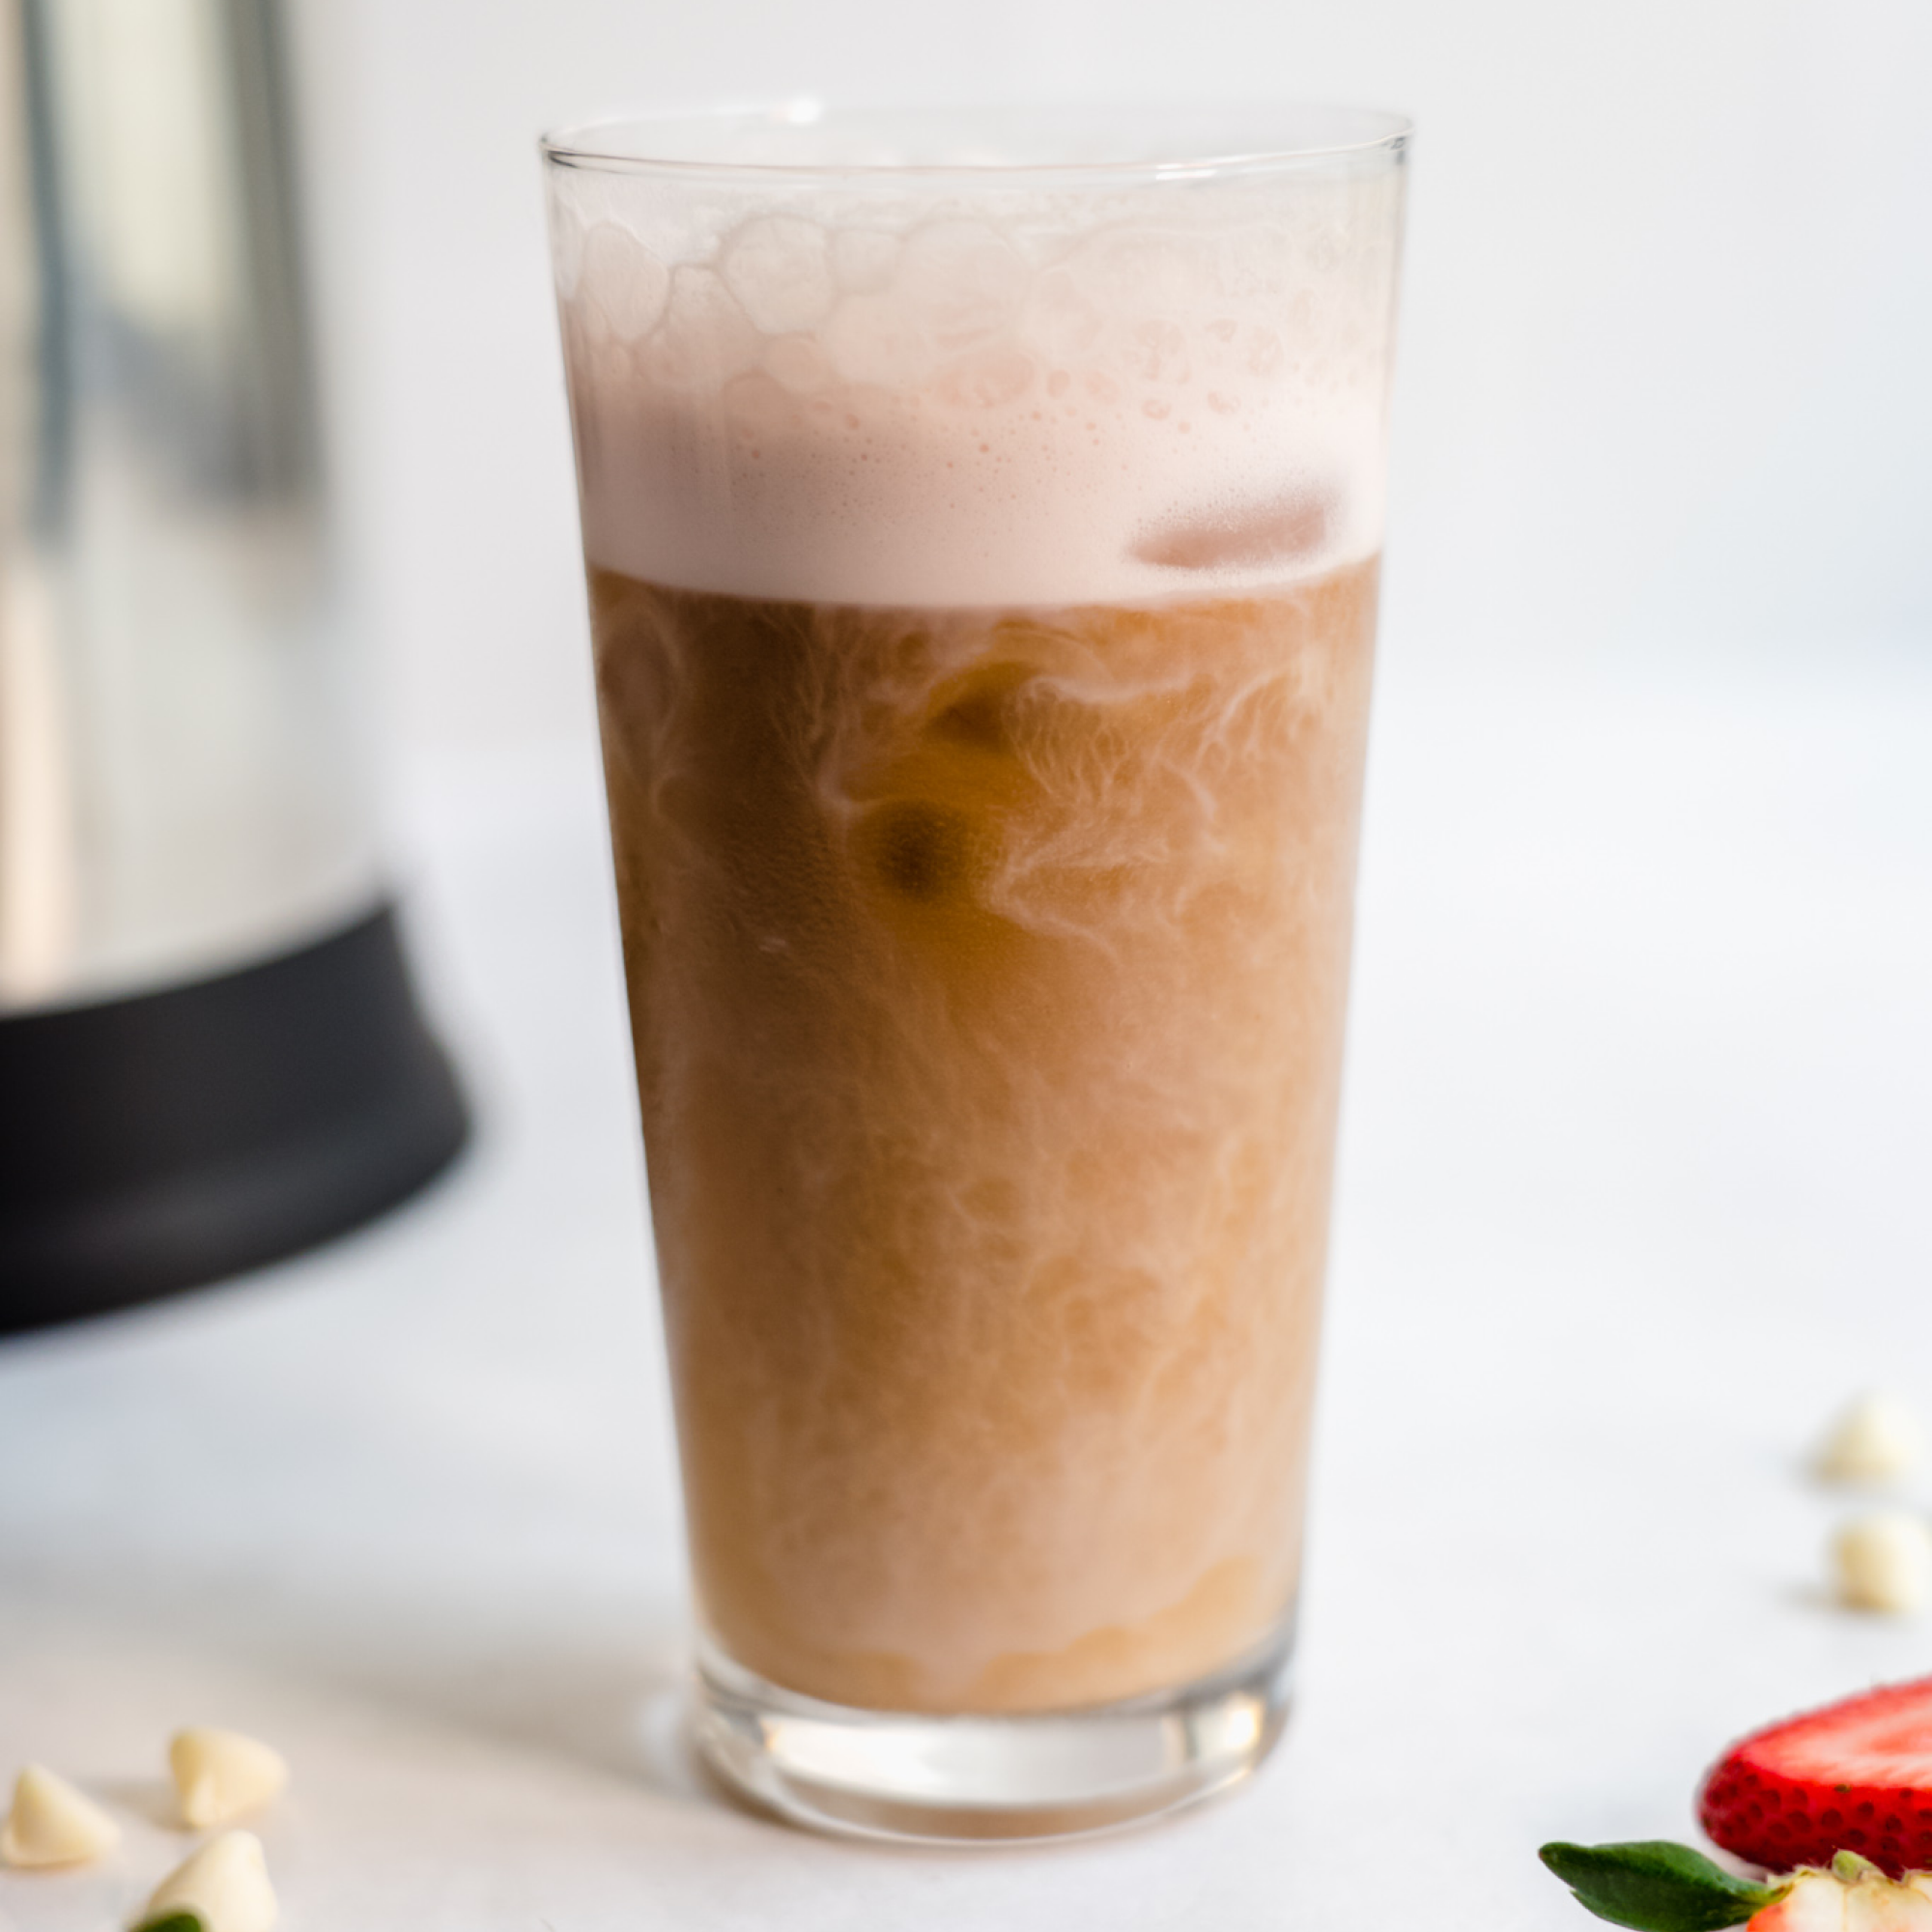 Iced White Chocolate Strawberry Latte made with the Almond Cow!